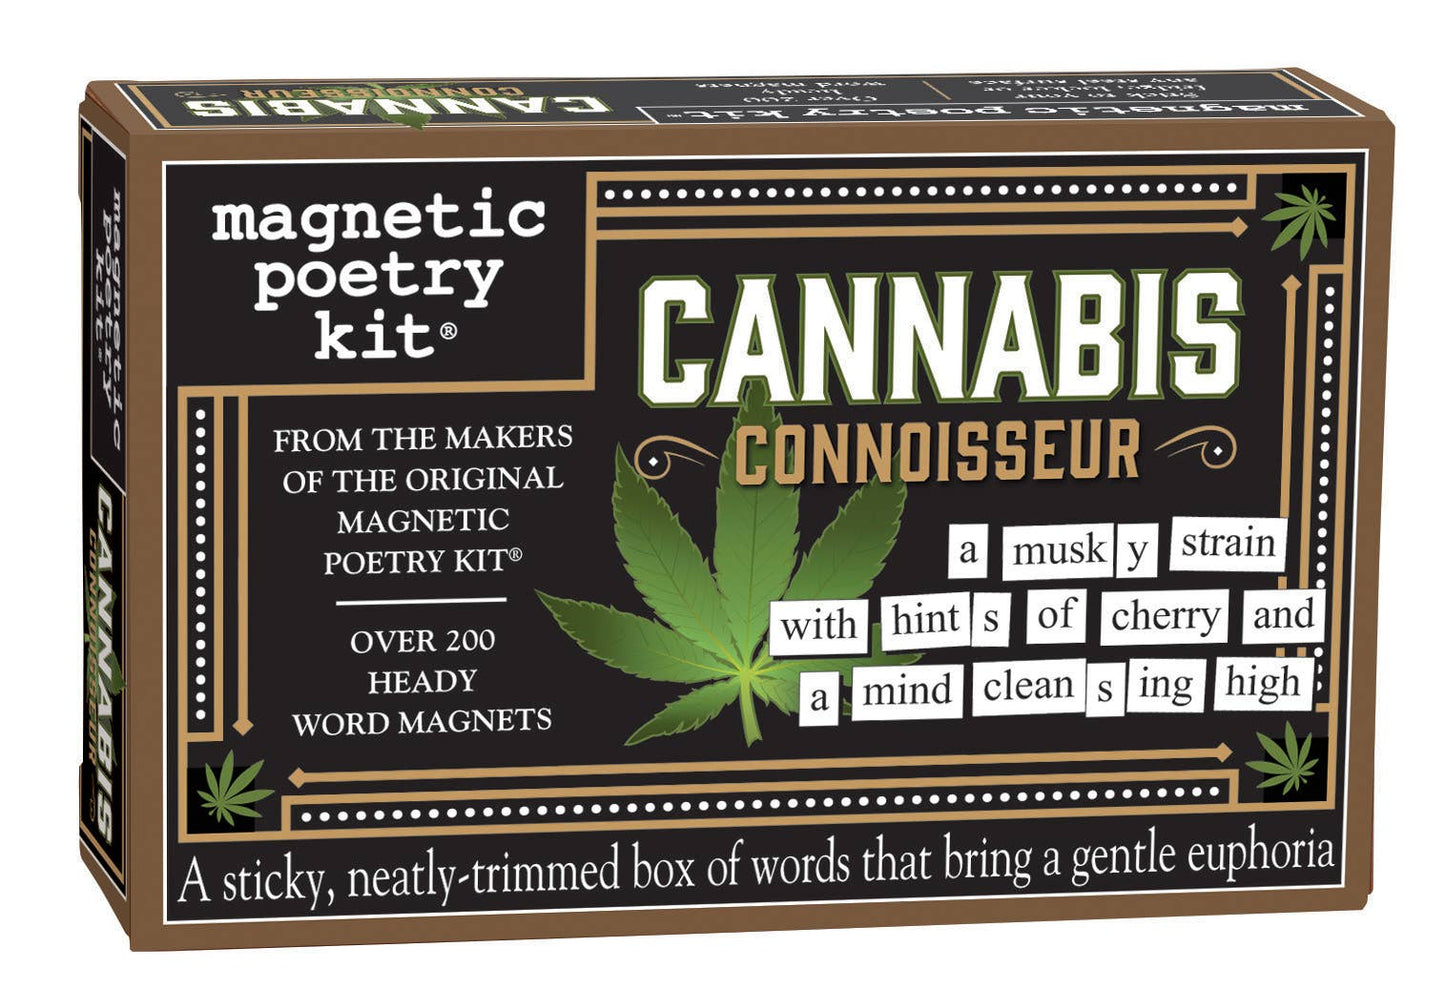 Magnetic Poetry - Cannabis Connoisseur